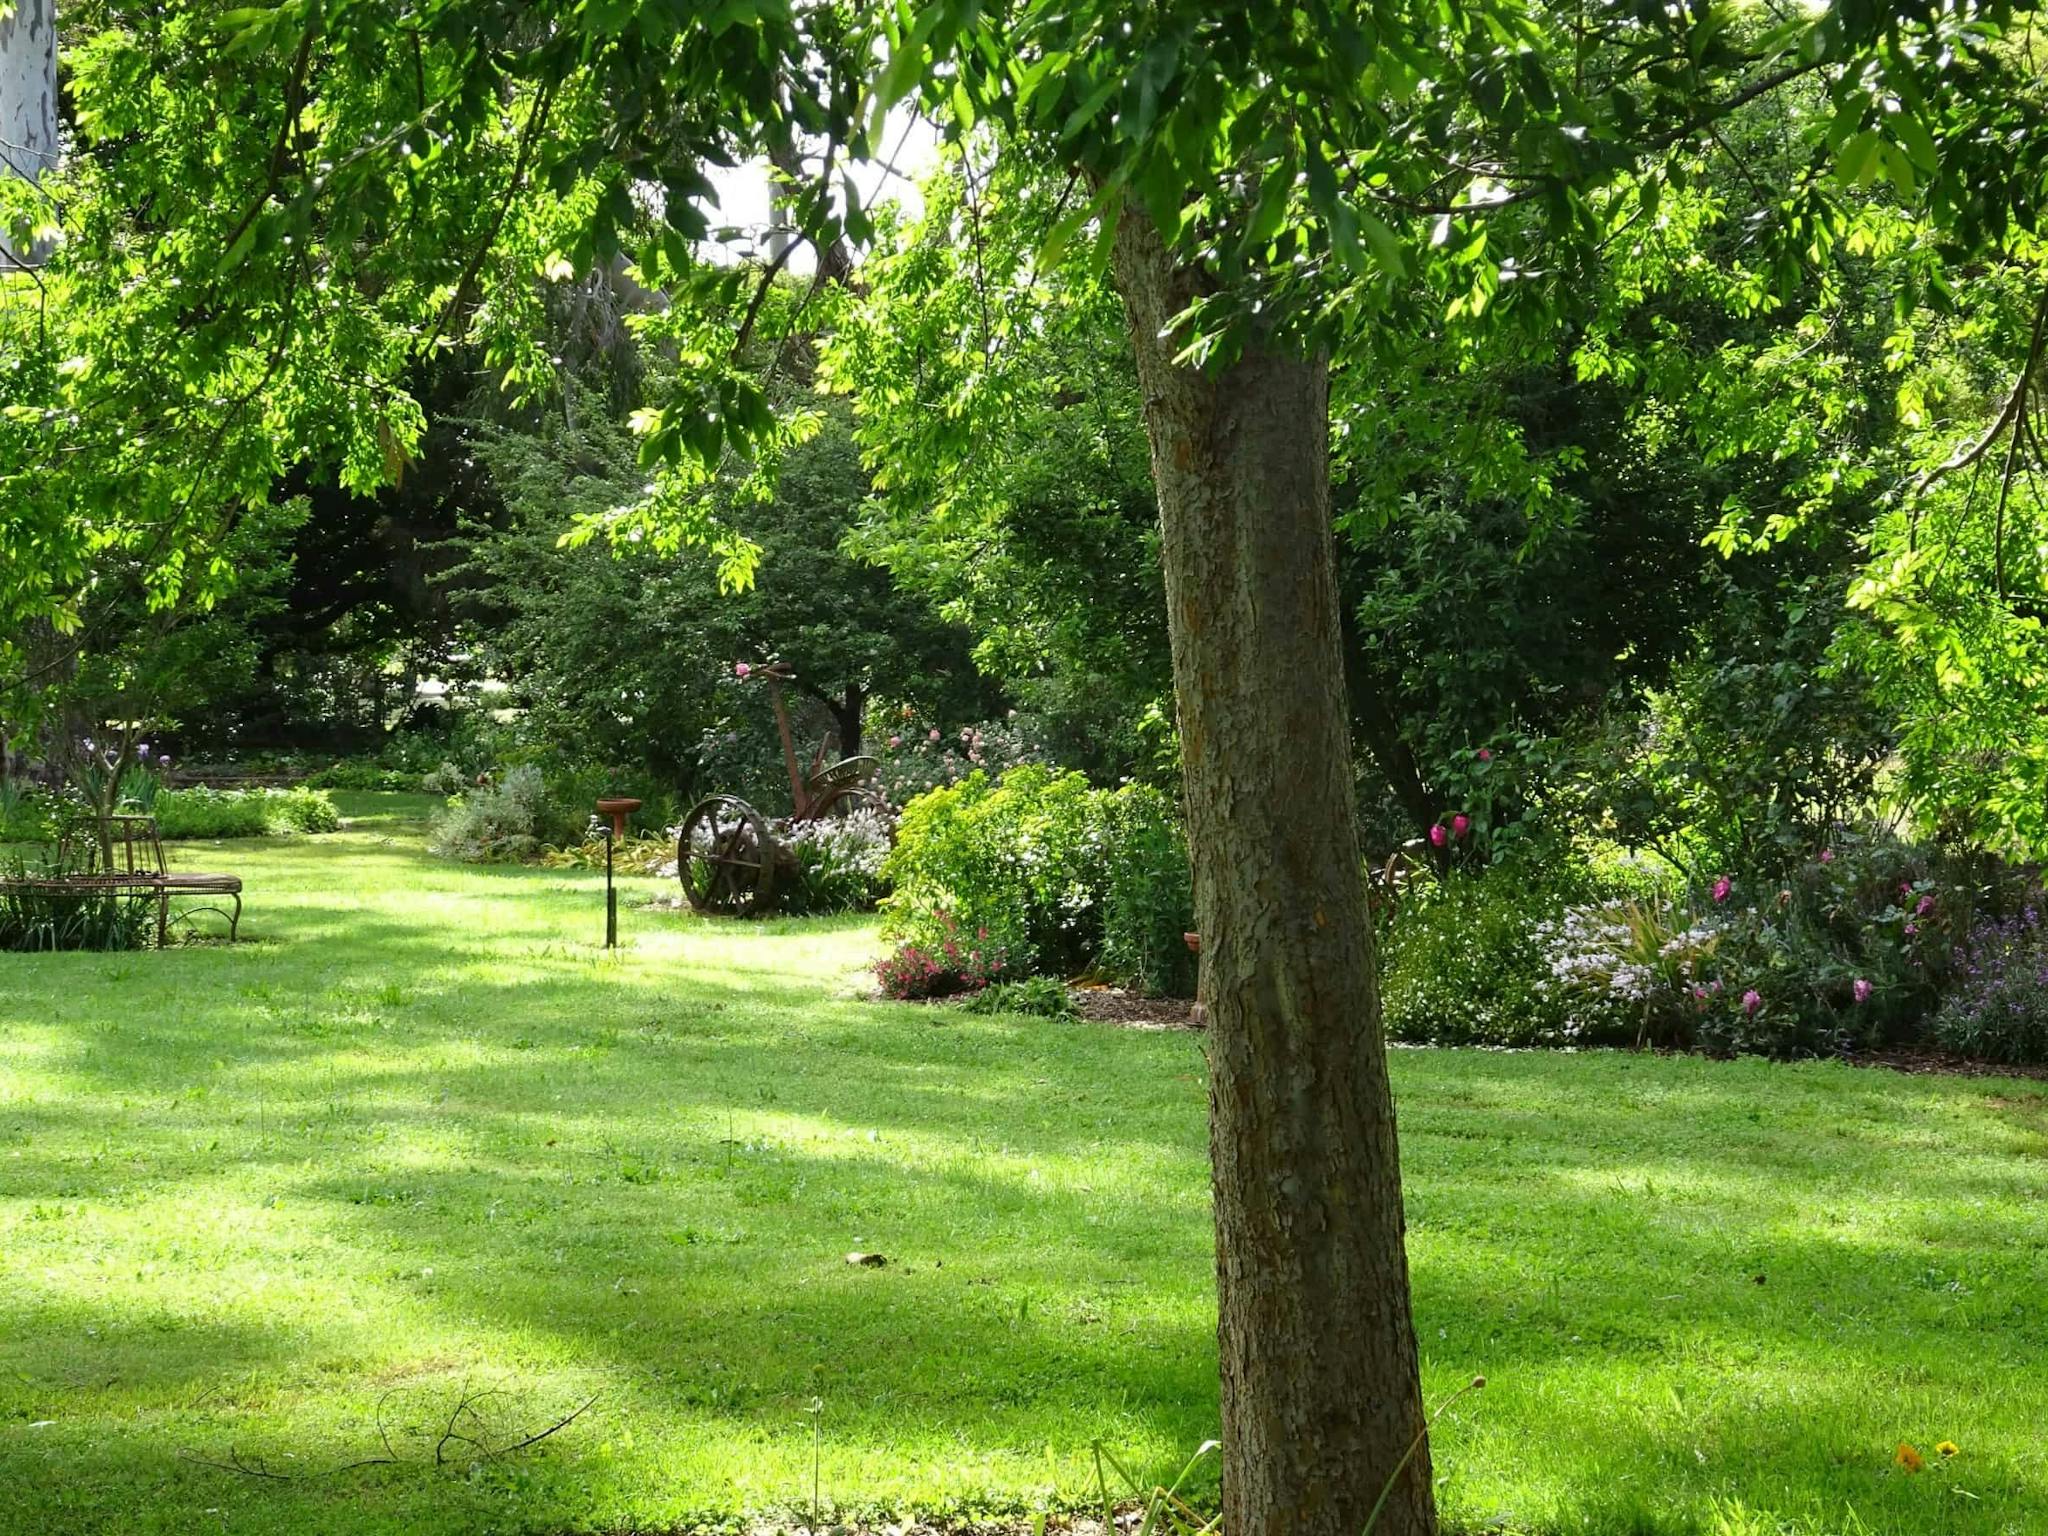 A green, grassy garden with many flowers and a large tree